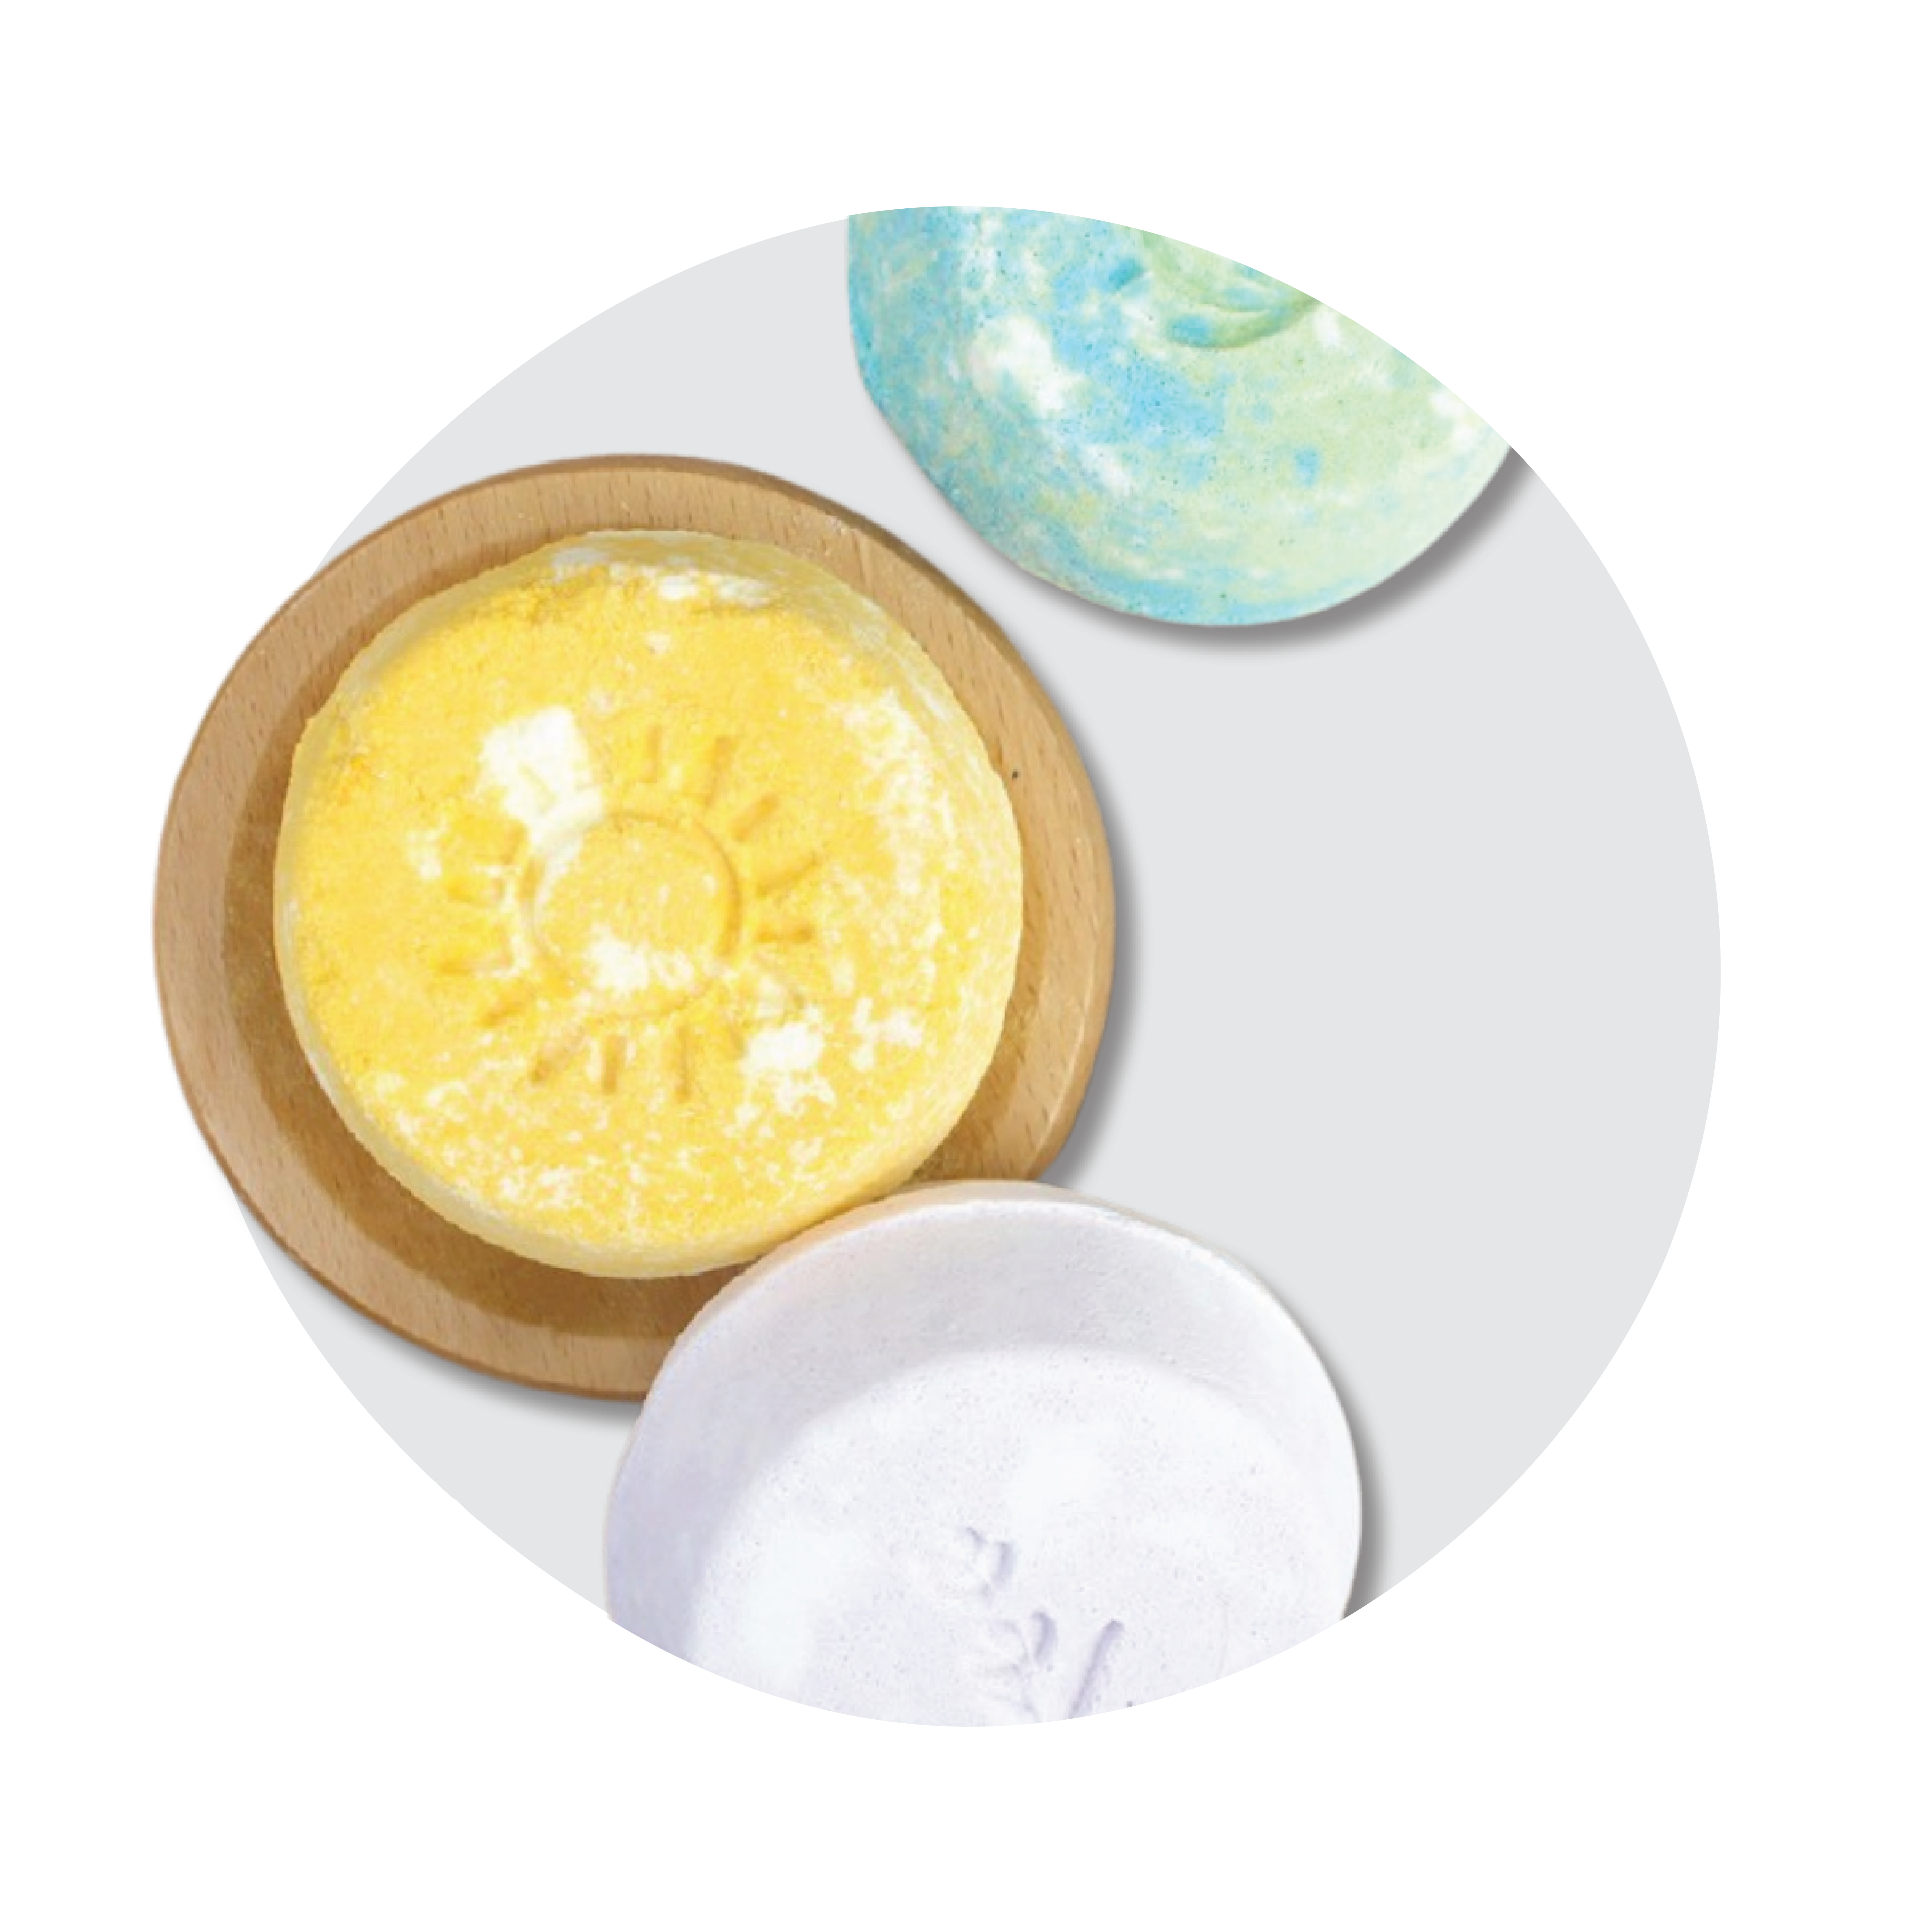 Image of variety of shower bombs